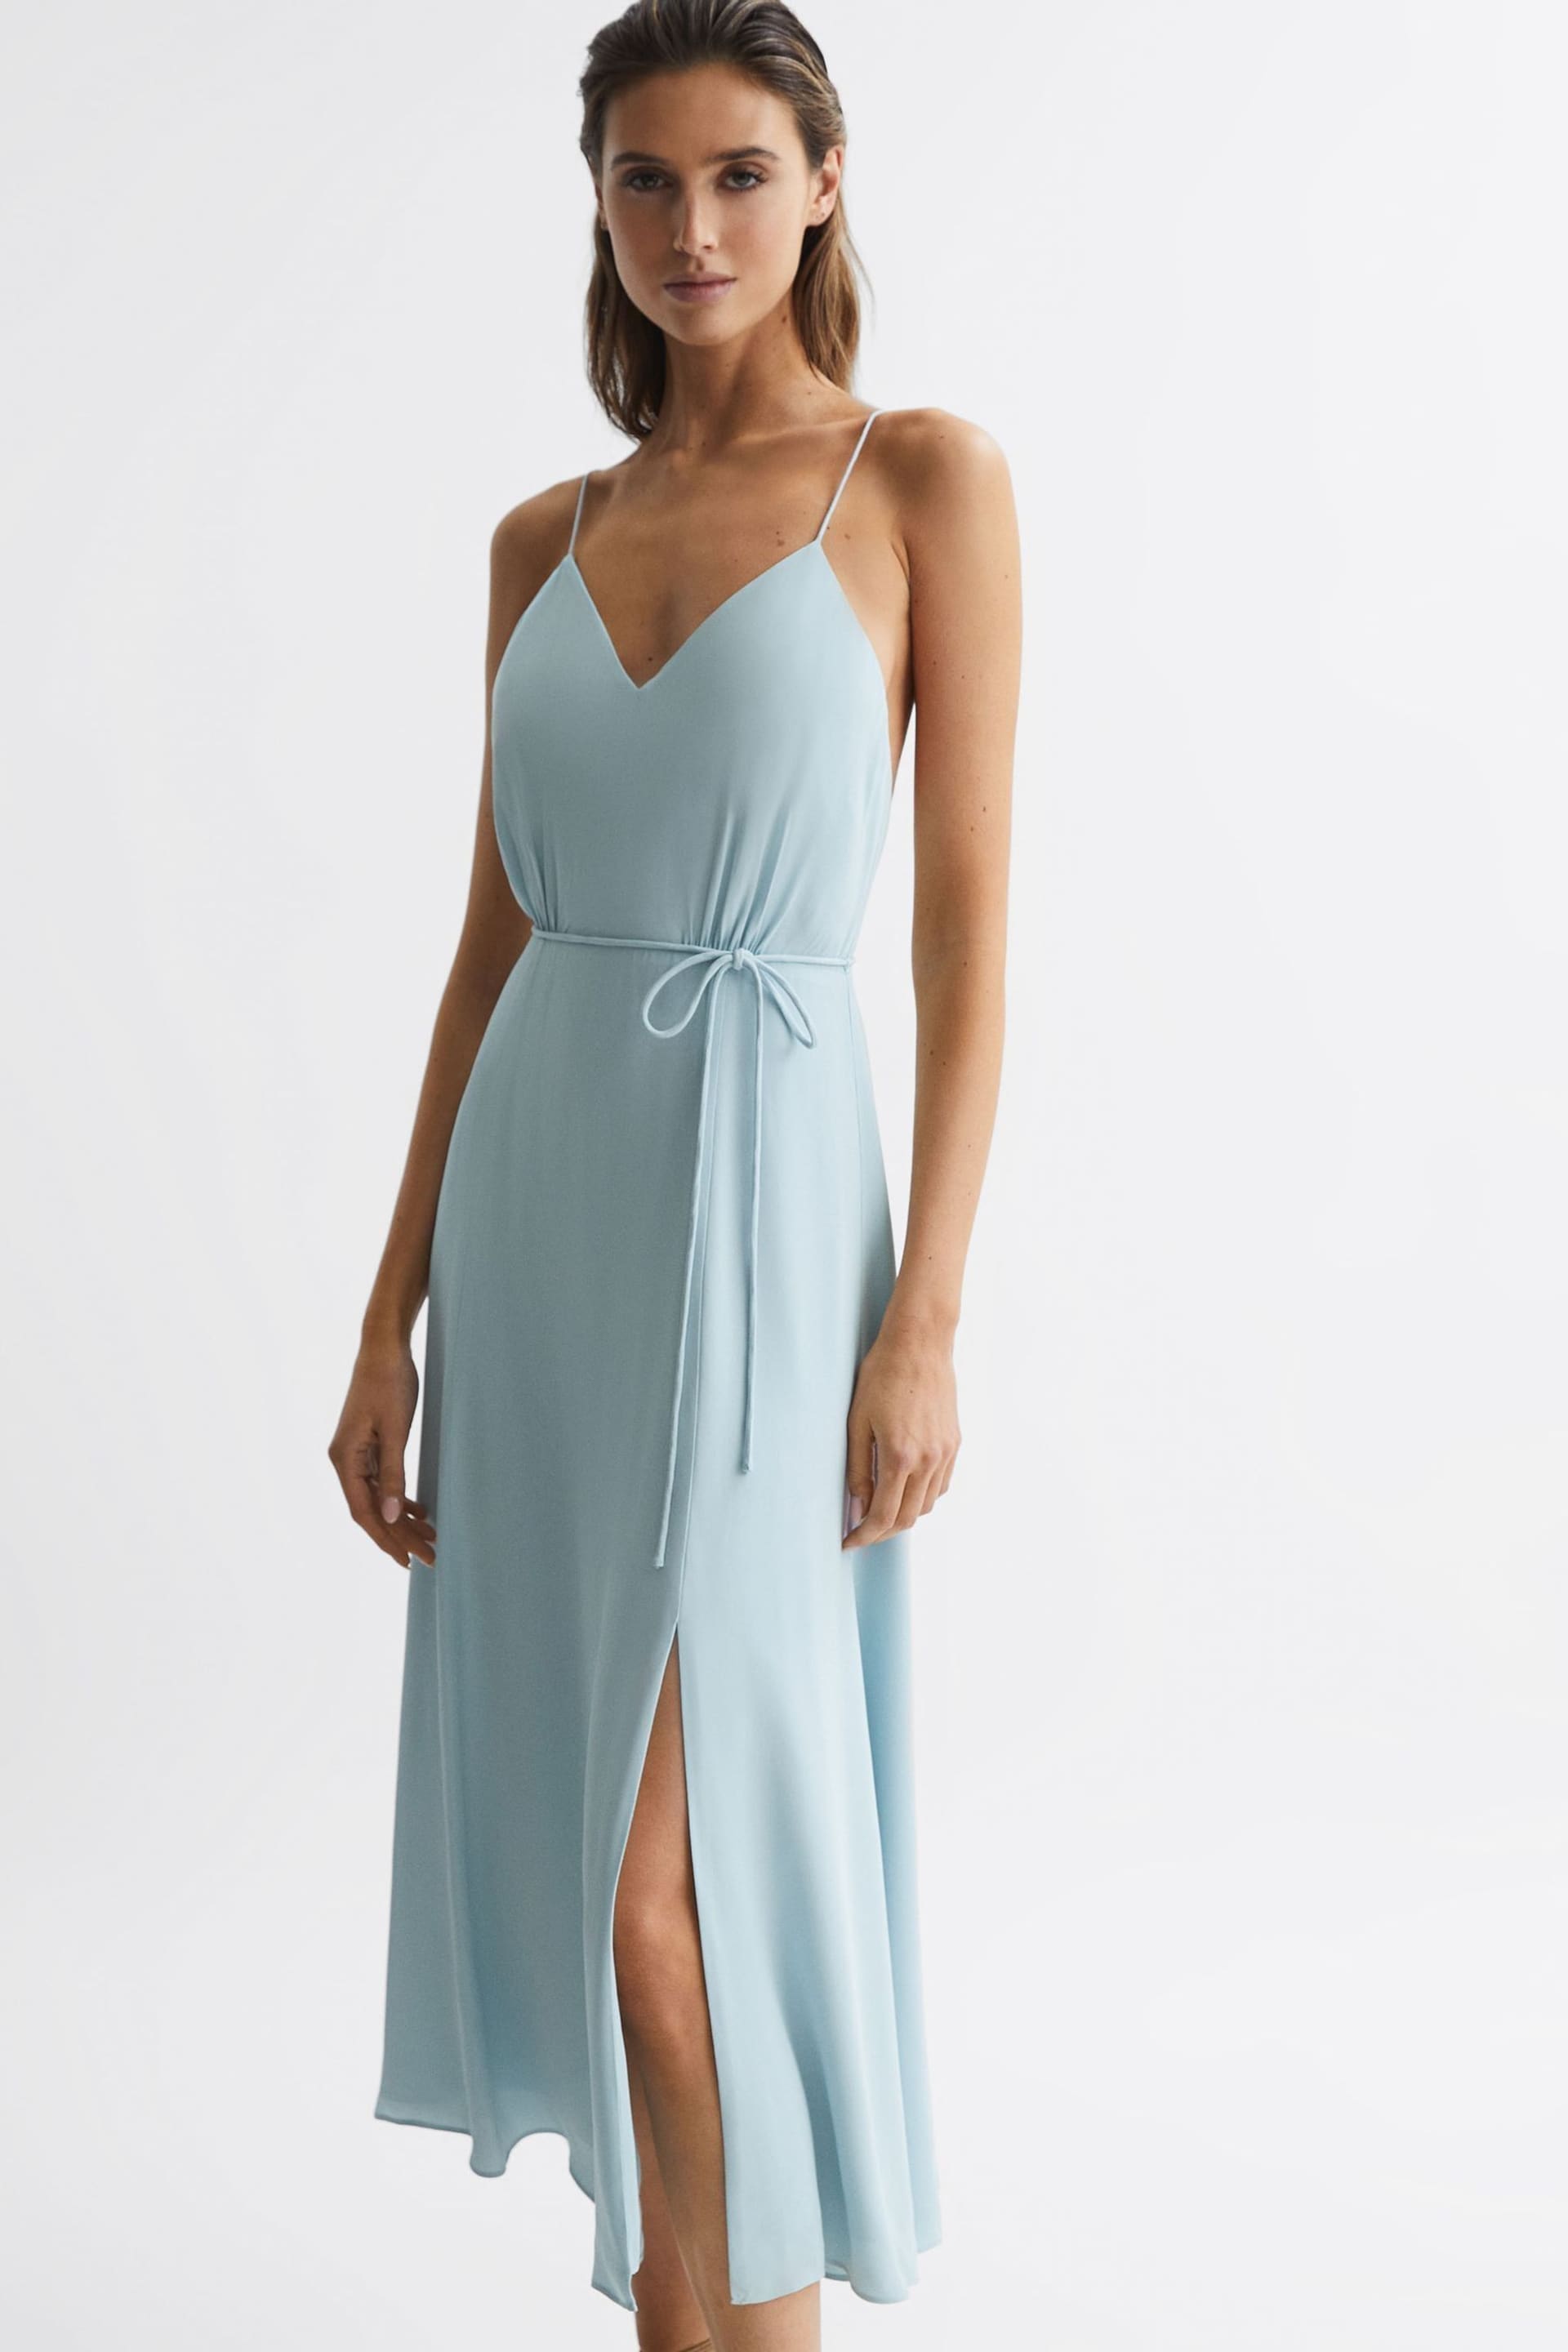 Reiss Blue Penny Fitted V-Neck Midi Dress - Image 3 of 6